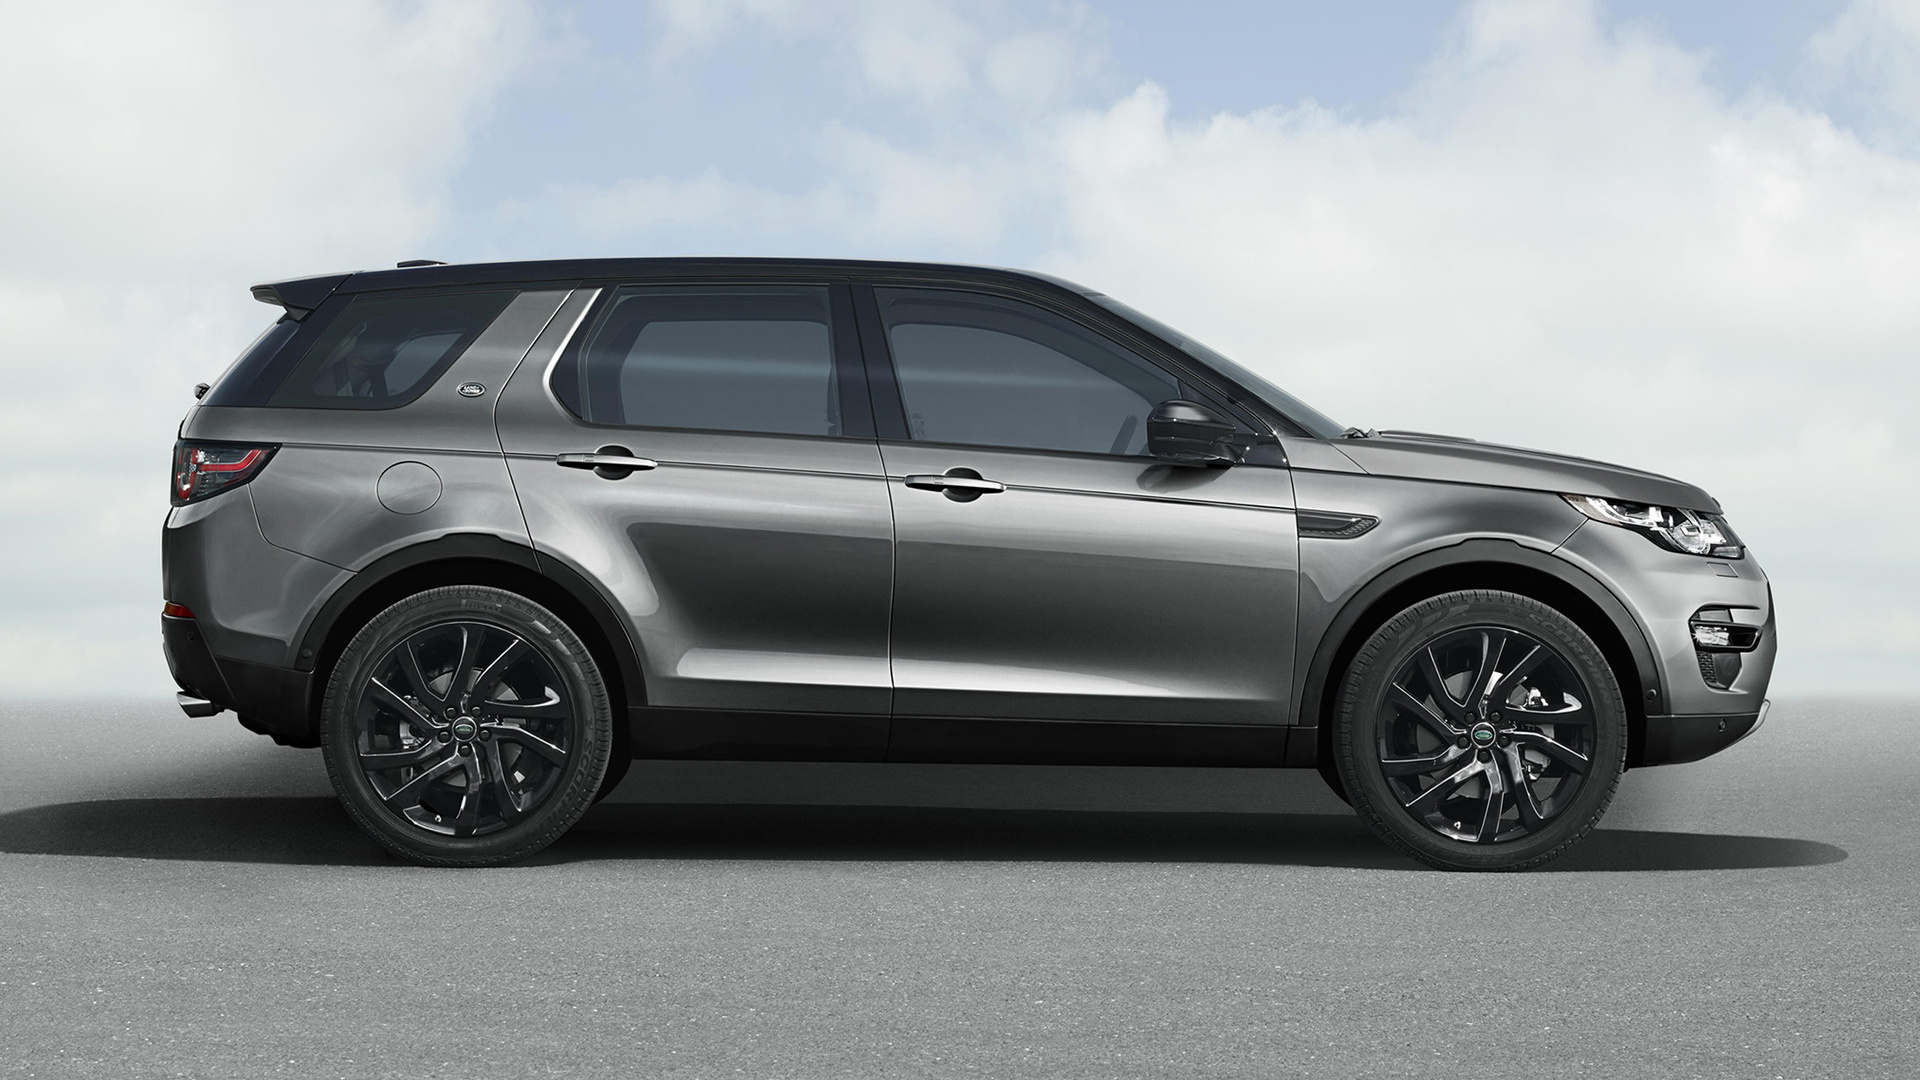 Black Car Car Crossover Car Land Rover Discovery Sport Hse Luxury Black Design Pack Subcompact Car S 1920x1080